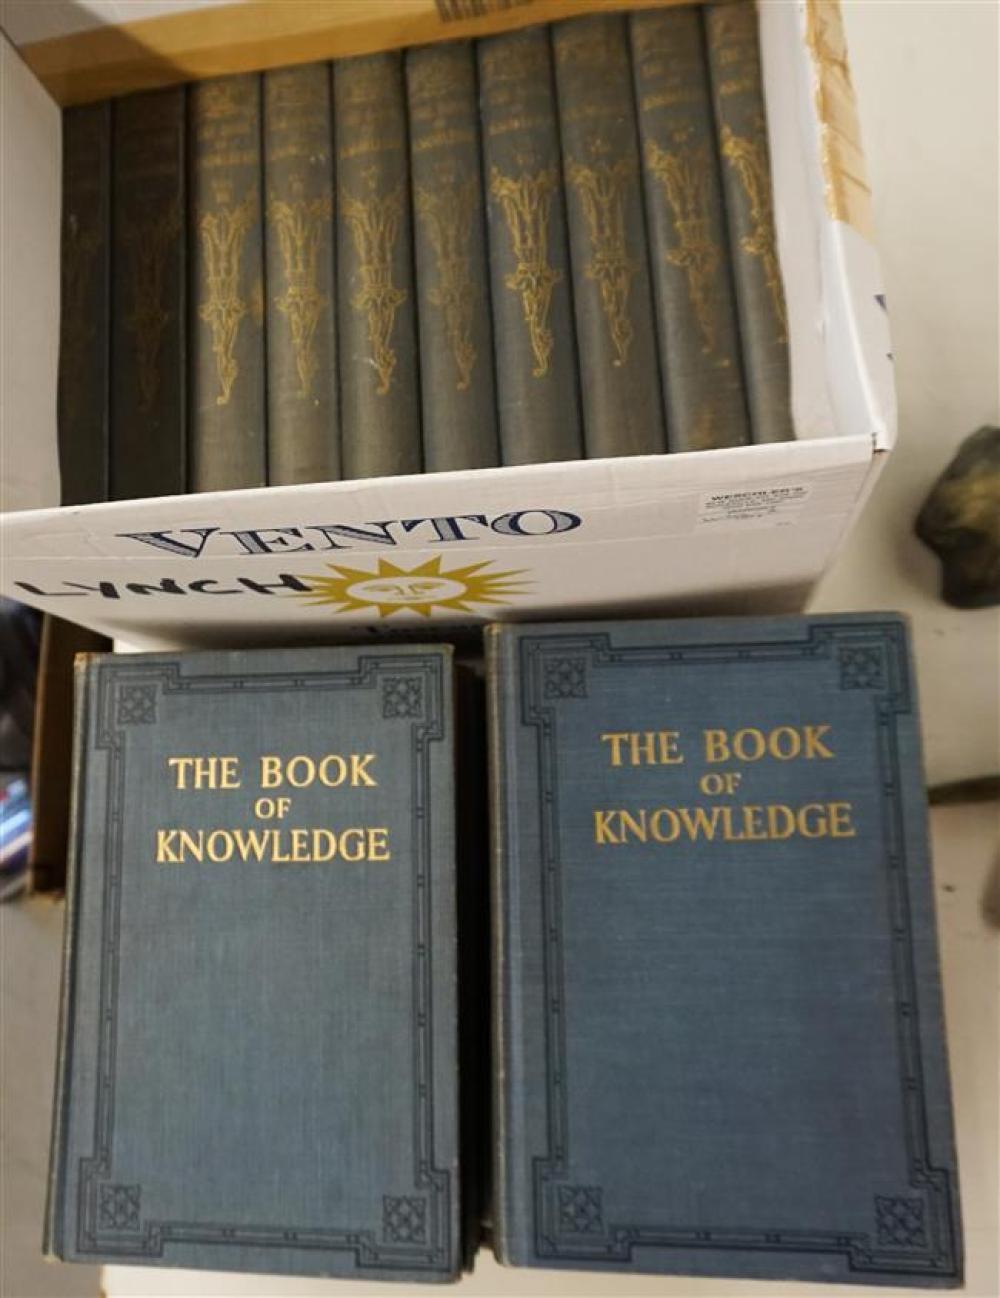 THE BOOK OF KNOWLEDGE 20 VOLUME